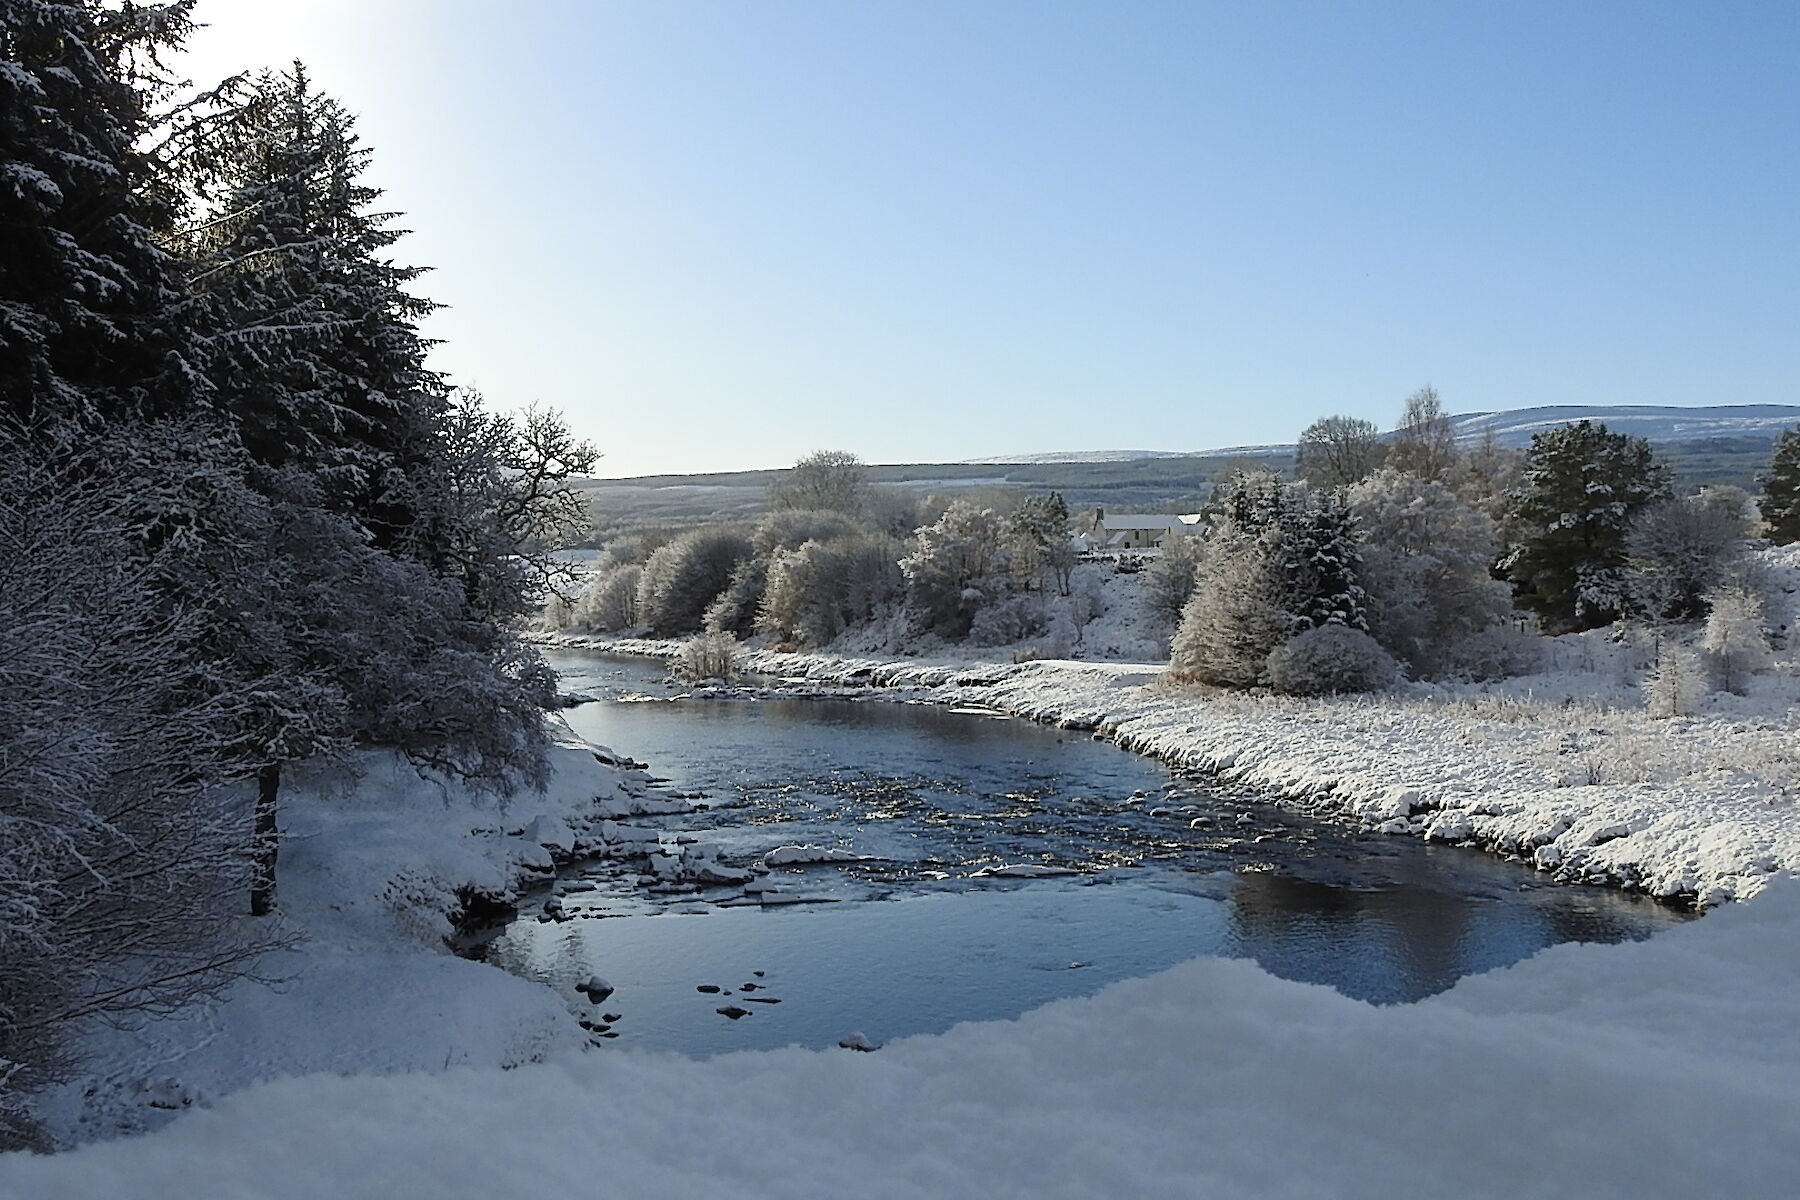 Rosehall image: frozen river with snow covering its banks